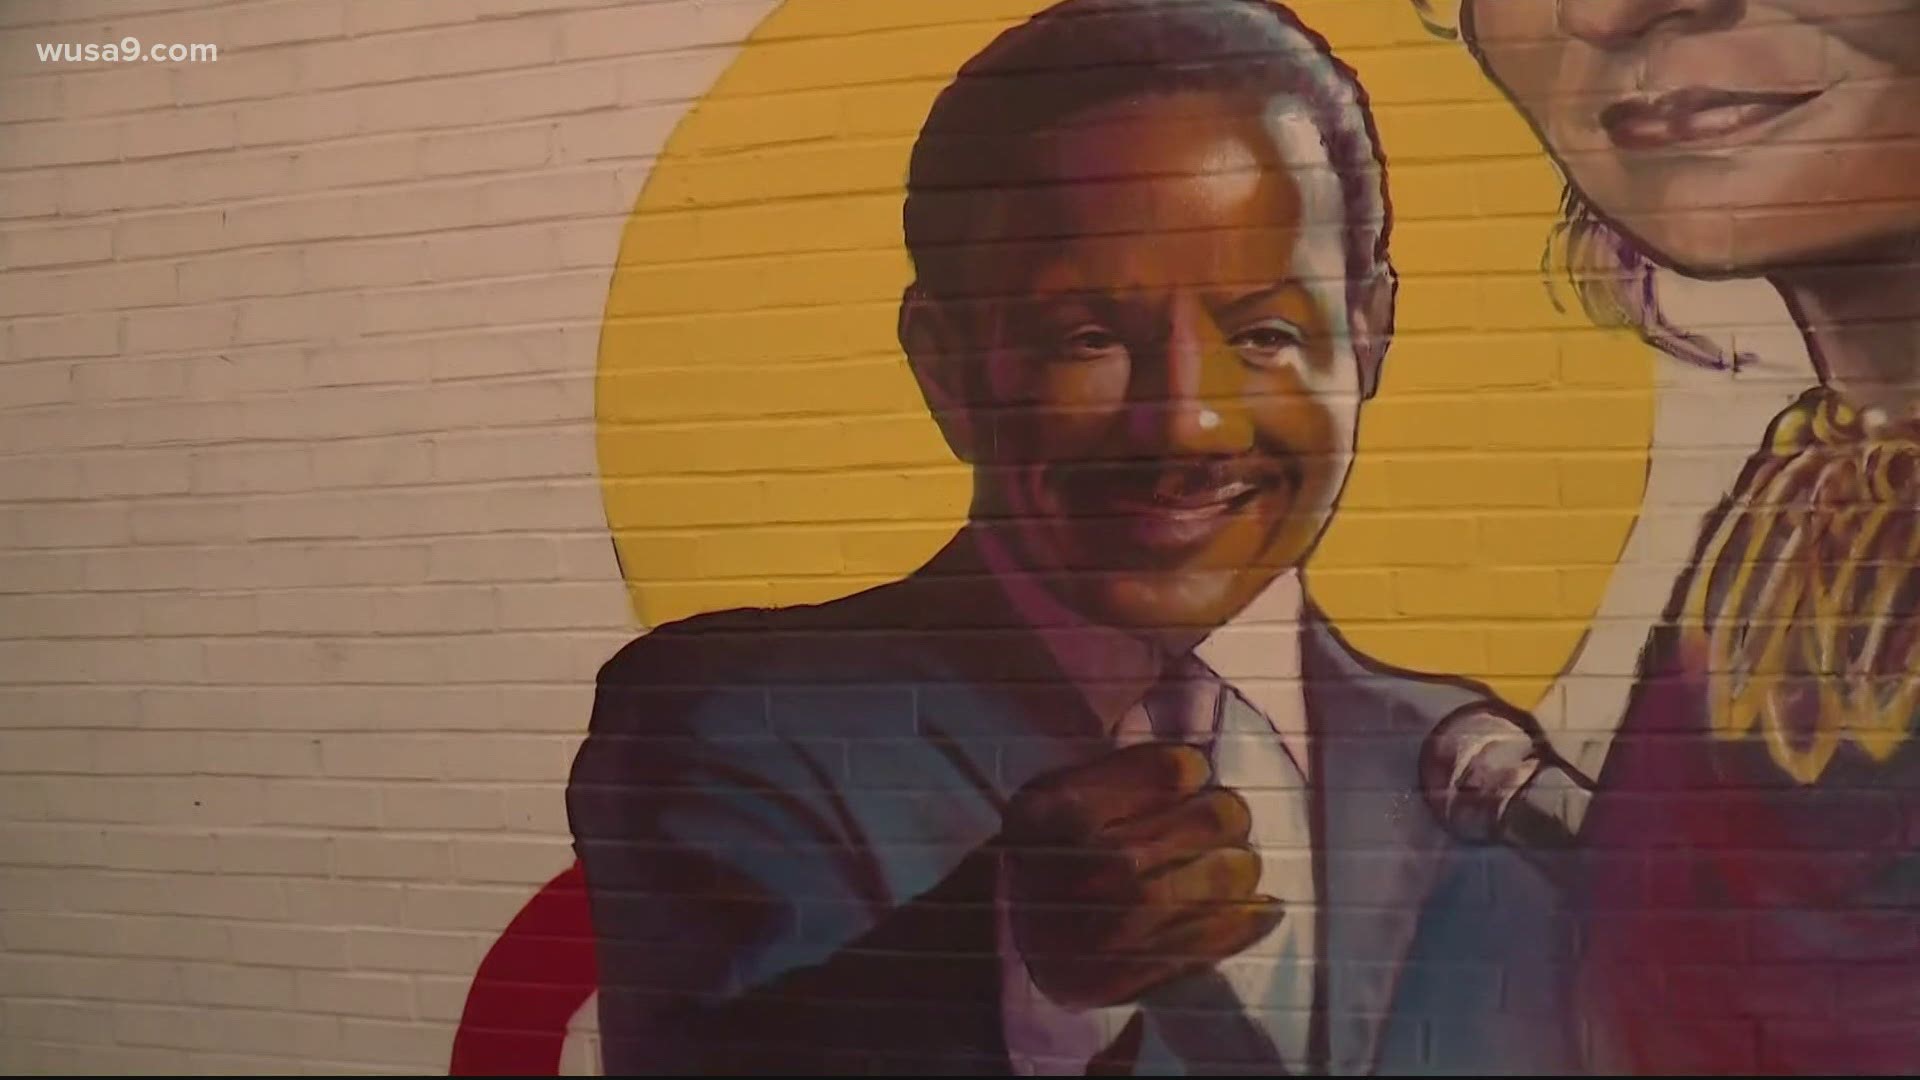 WUSA9's Bruce Johnson is honored with a spot on the mural outside of Ben's Chili Bowl in D.C.